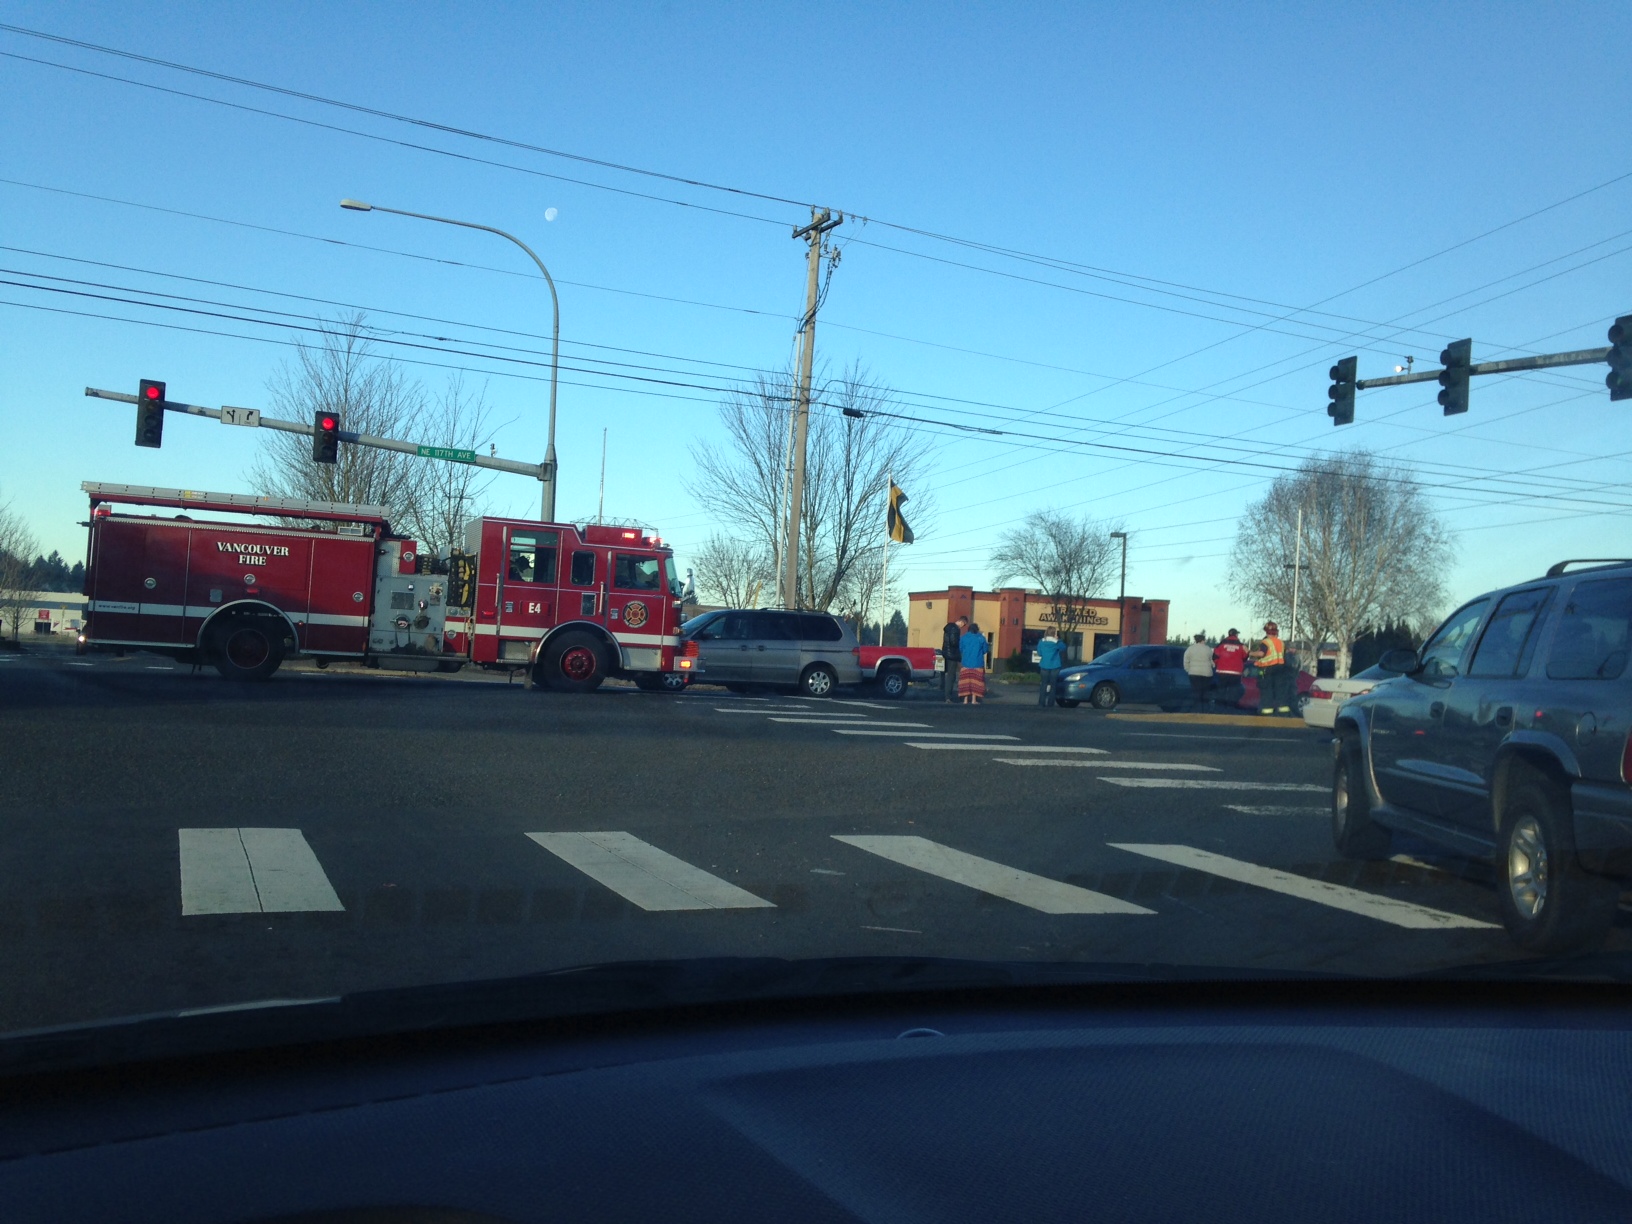 A four-car fender-bender briefly blocked the intersection at Northeast 117th Avenue and Northeast 65th Street.